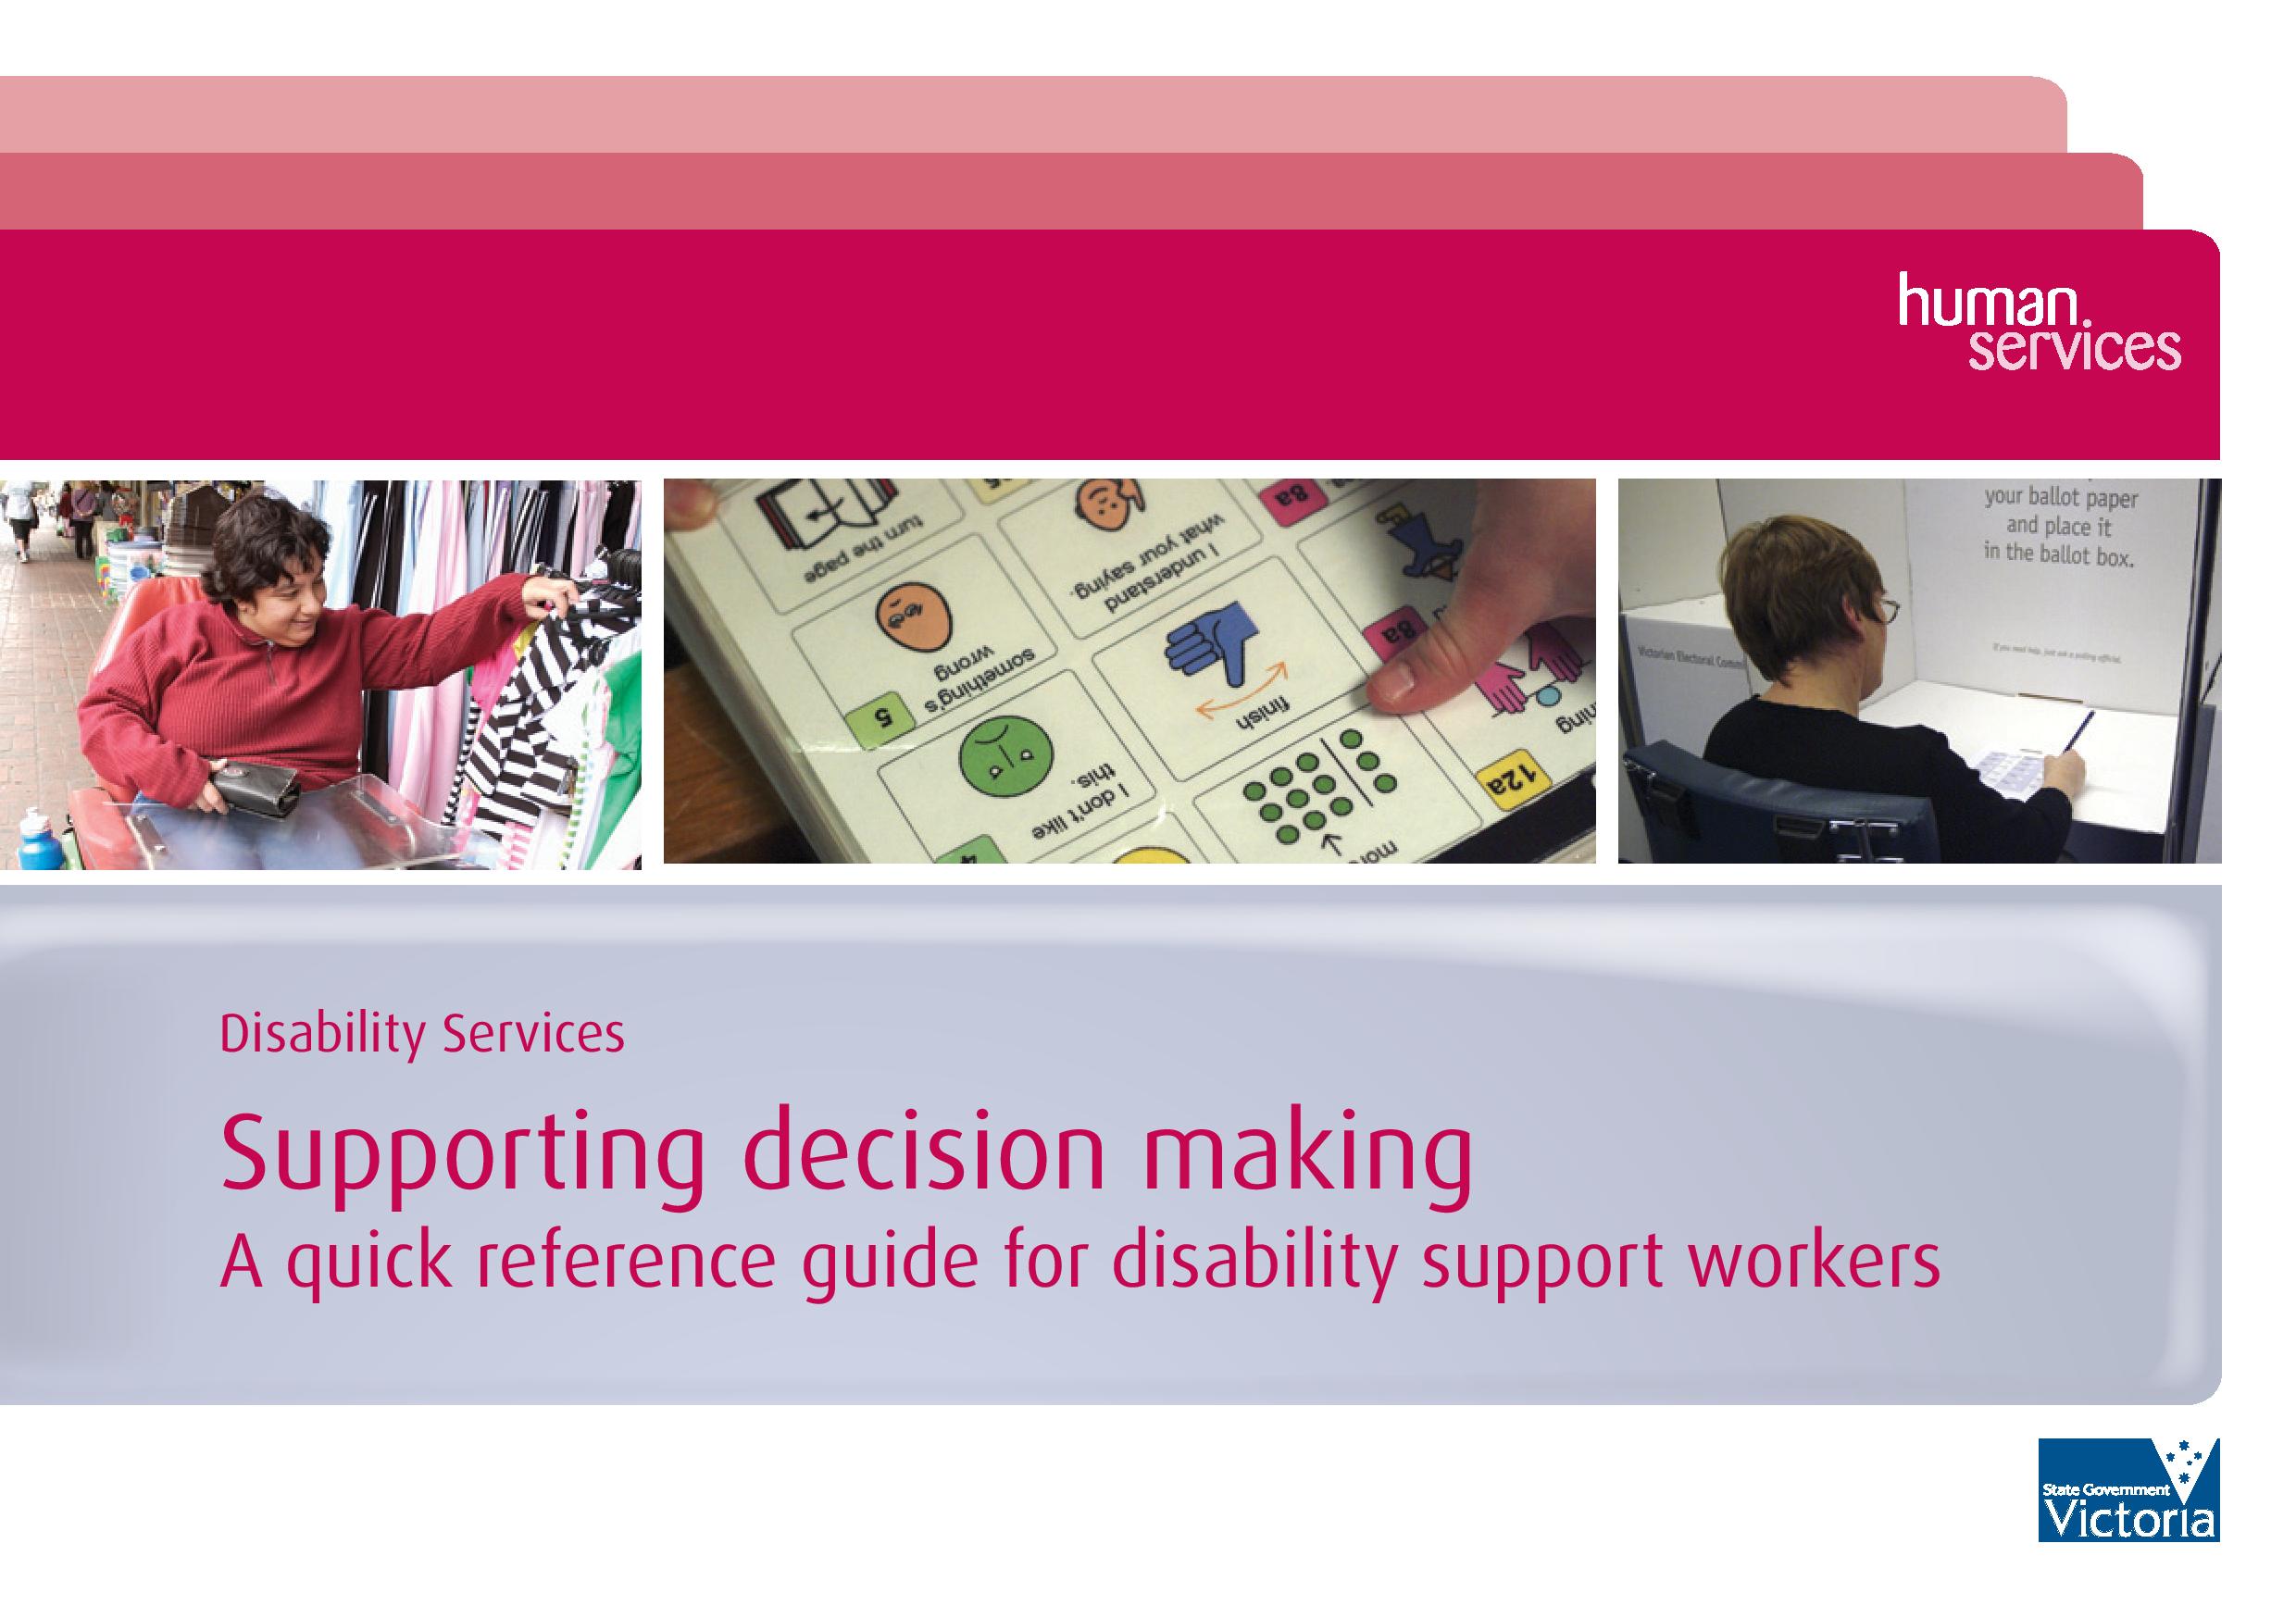 Cover art for: Disability Services Supporting decision making: A quick reference guide for disability support workers